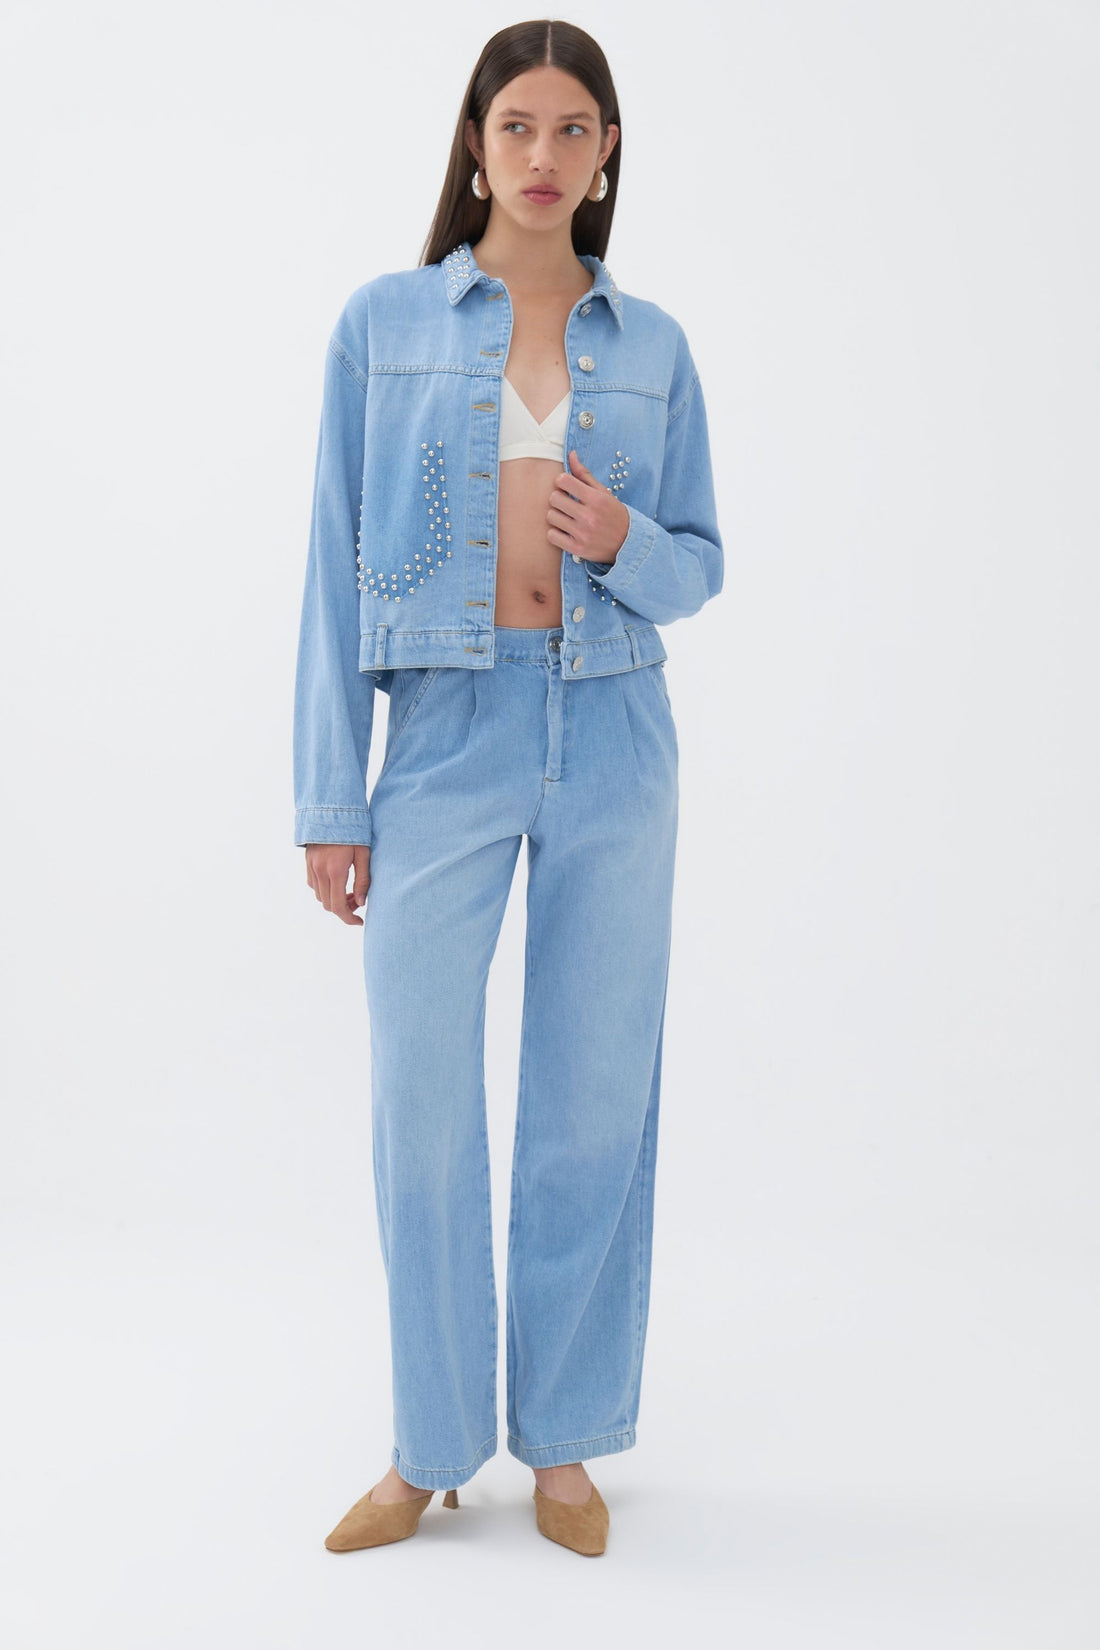 Pleated Jean Trousers